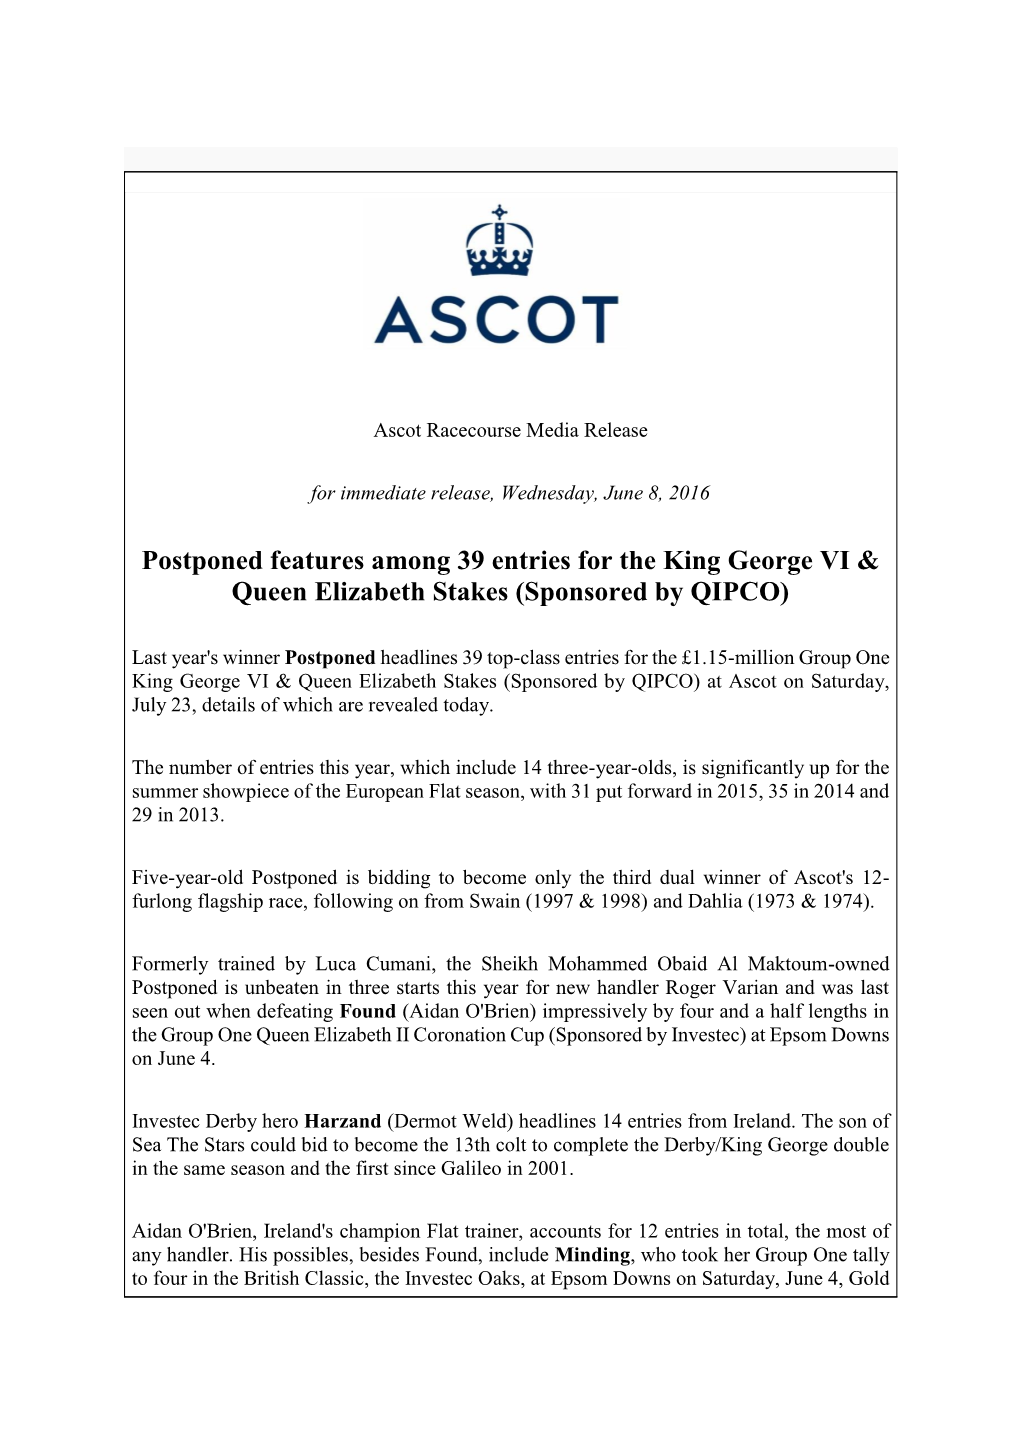 Postponed Features Among 39 Entries for the King George VI & Queen